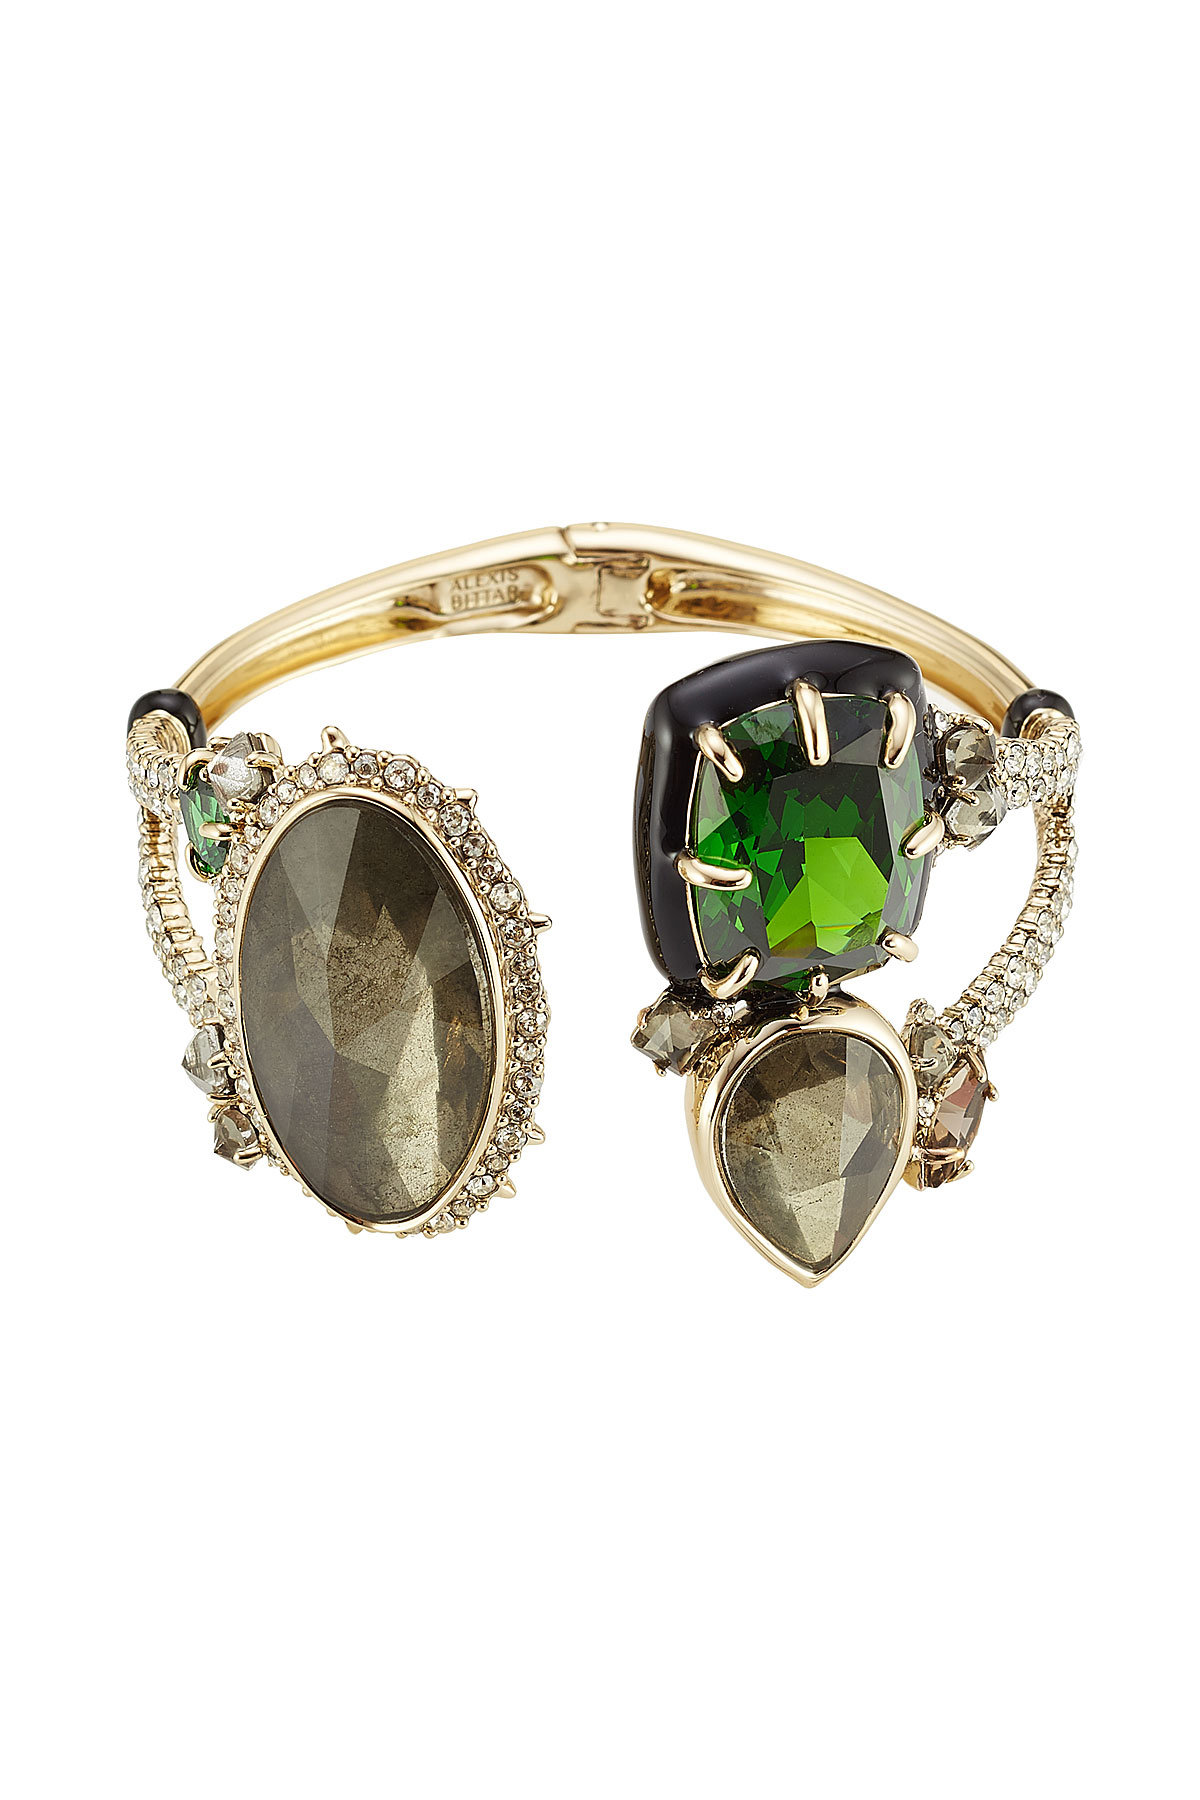 Alexis Bittar - Open Front Cuff with Crystals